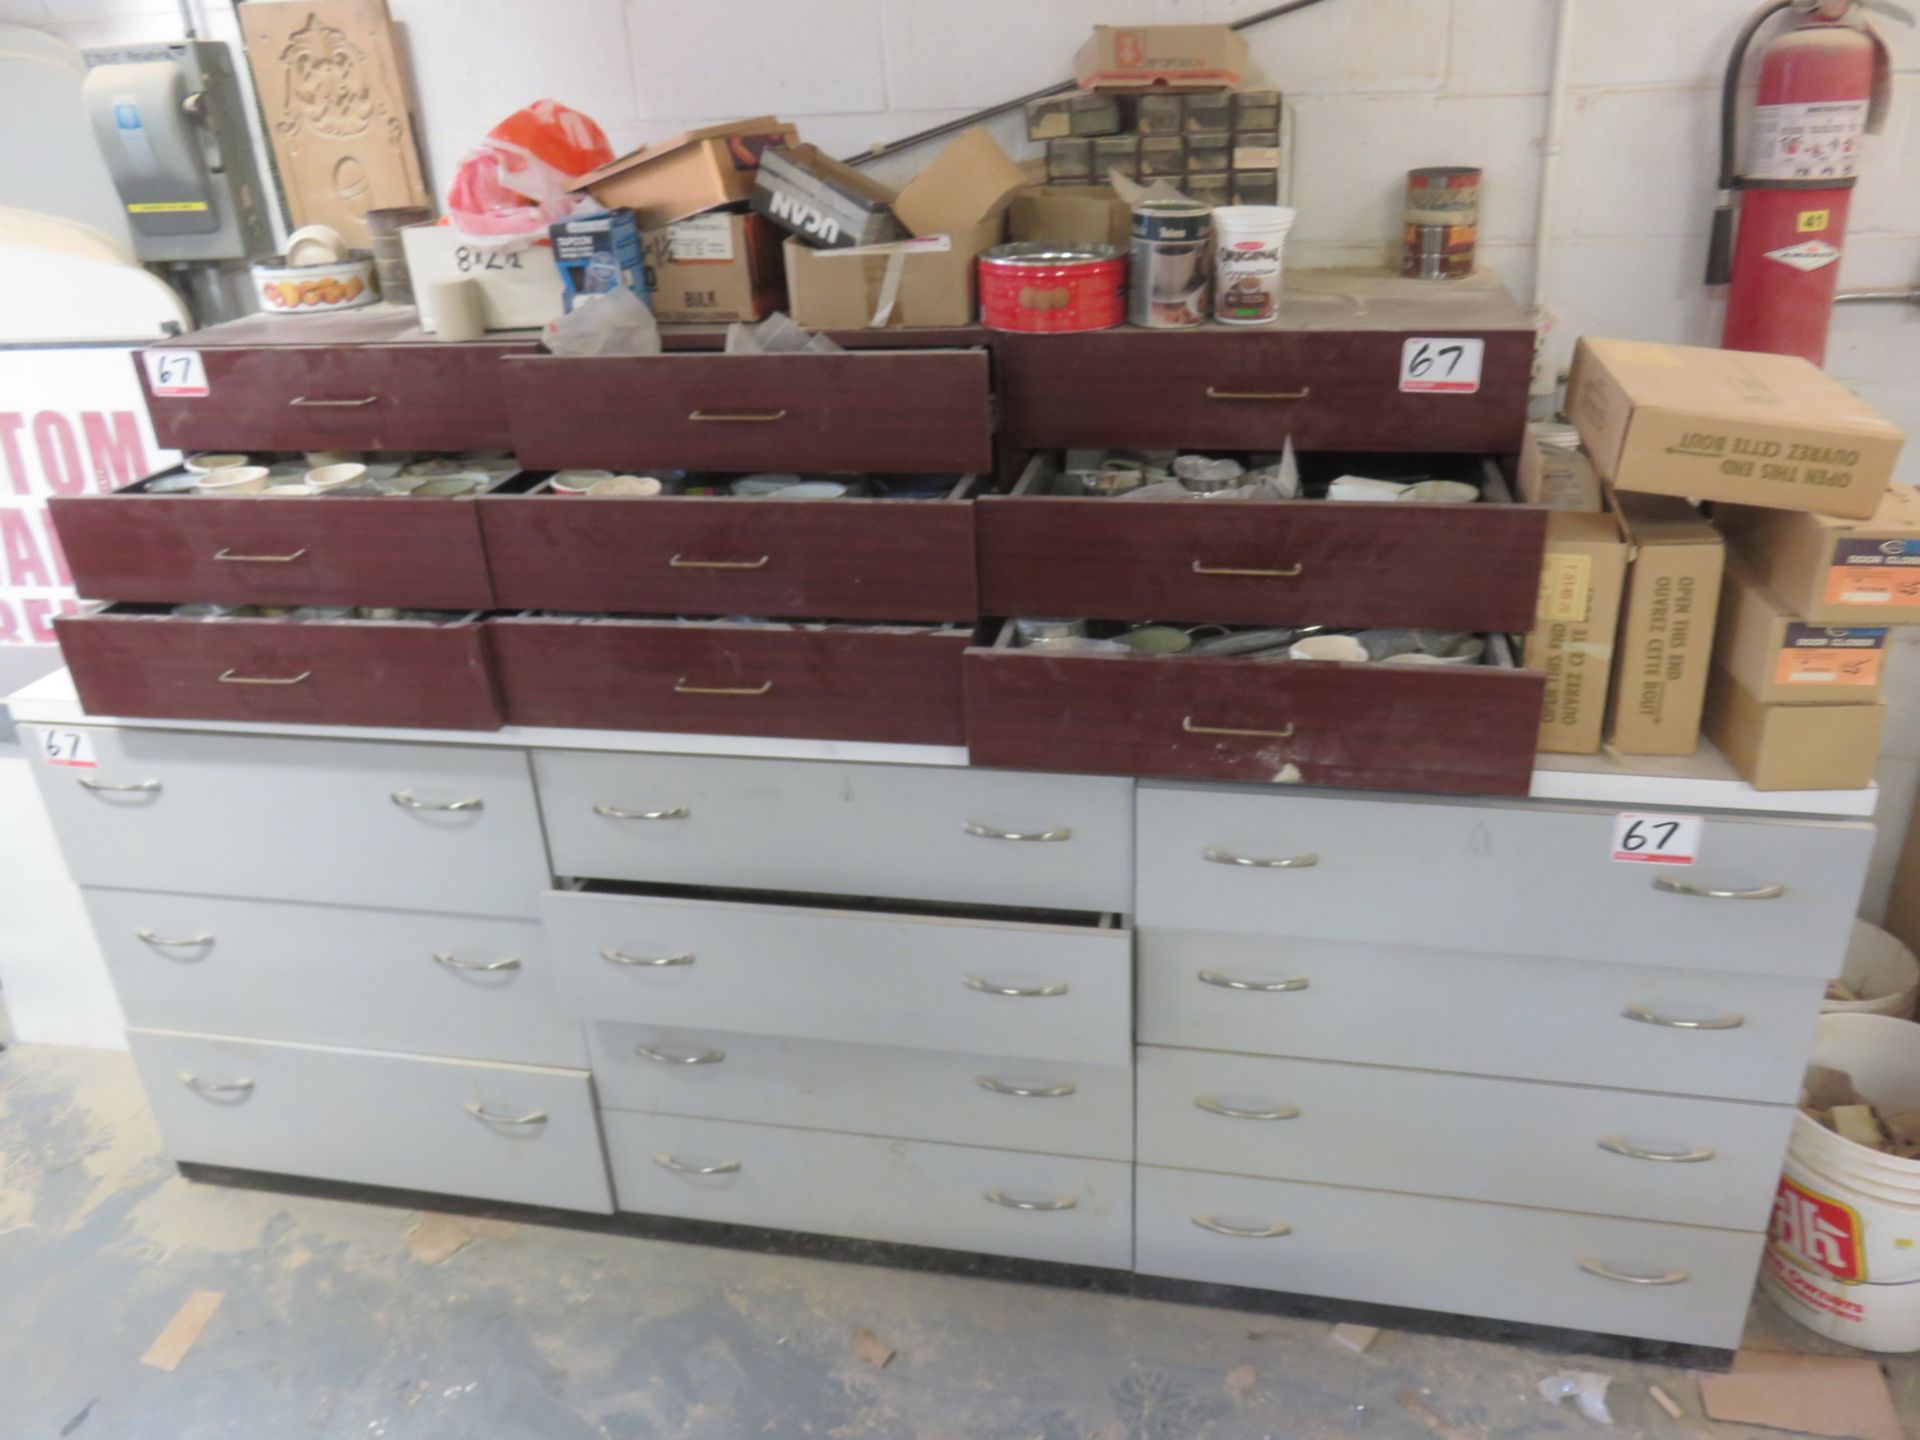 LOT - GREY & BROWN CABINETS W/ SCREWS, FITTINGS, SHELF SUPPORTS, DESKTOP CARD COVERS, ETC (NO FIRE